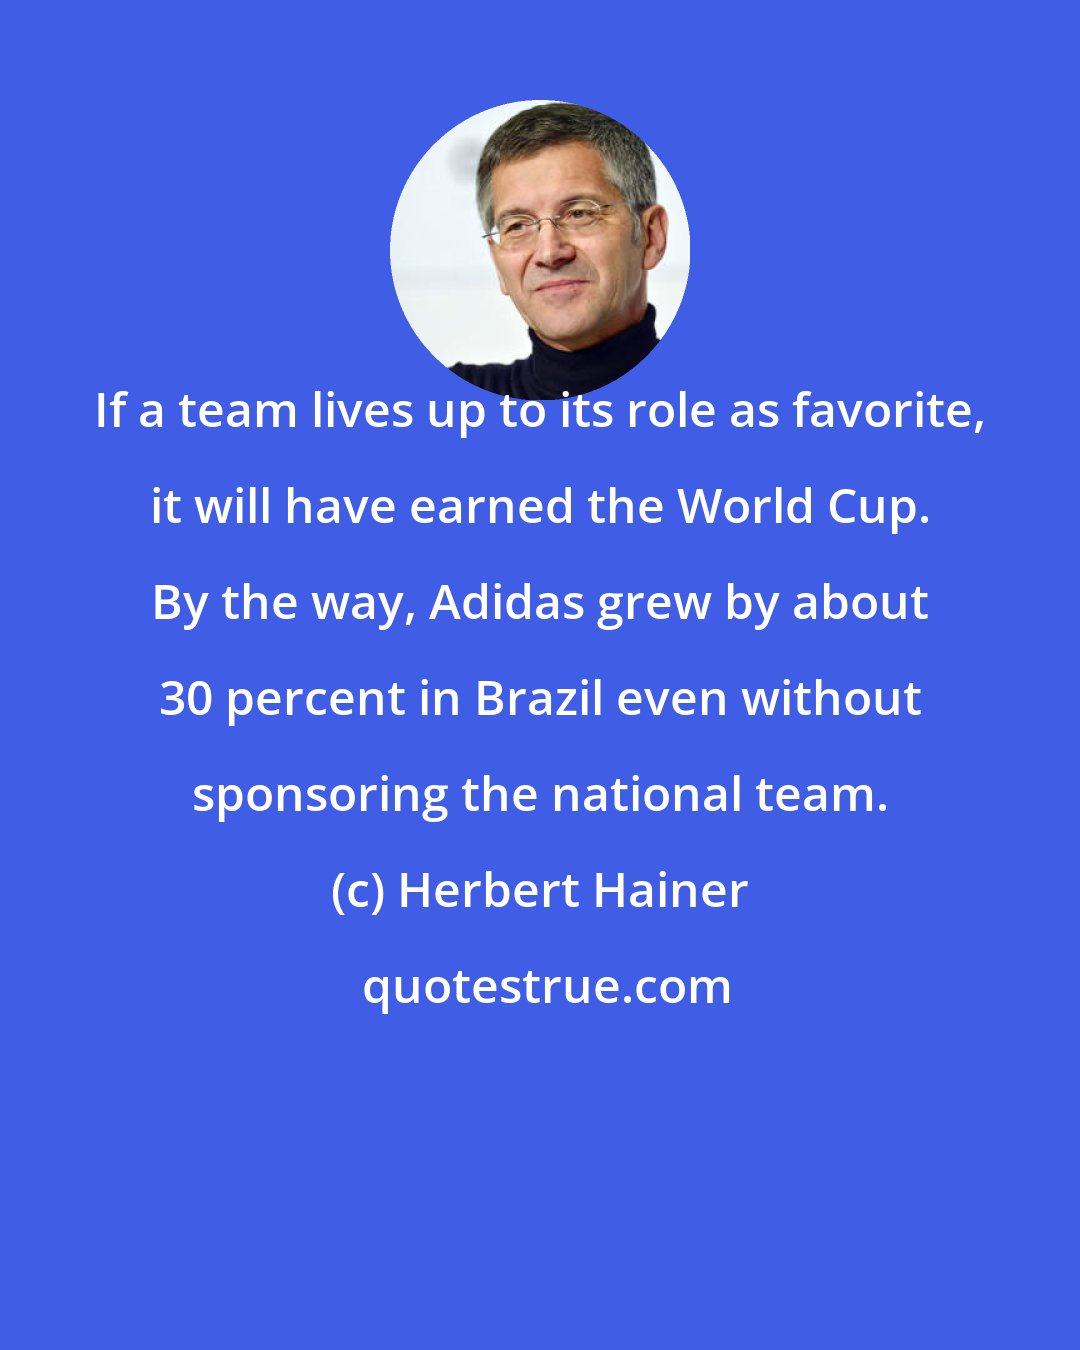 Herbert Hainer: If a team lives up to its role as favorite, it will have earned the World Cup. By the way, Adidas grew by about 30 percent in Brazil even without sponsoring the national team.